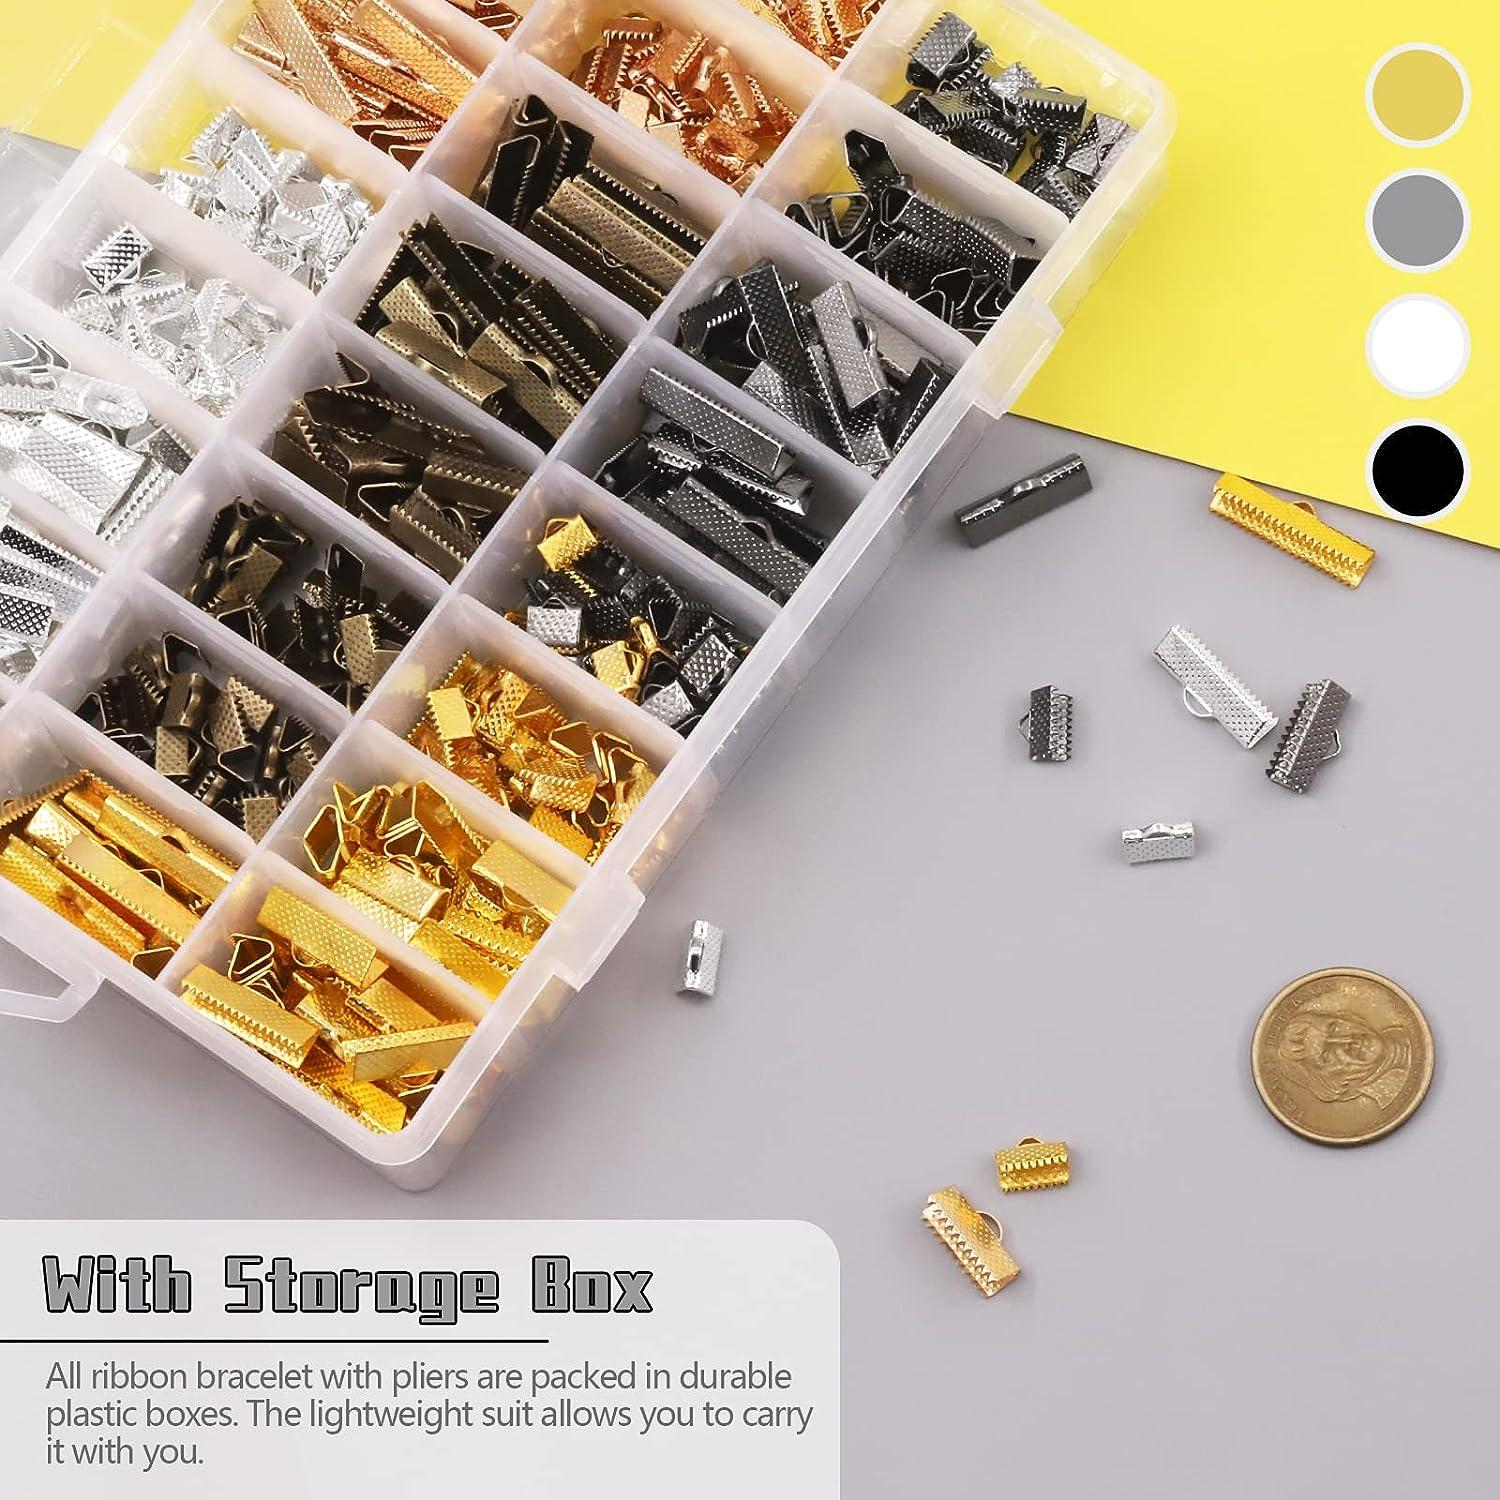 New Jewelry Repair Kit W/gold Filled Assorted Jump Rings W/ Plier